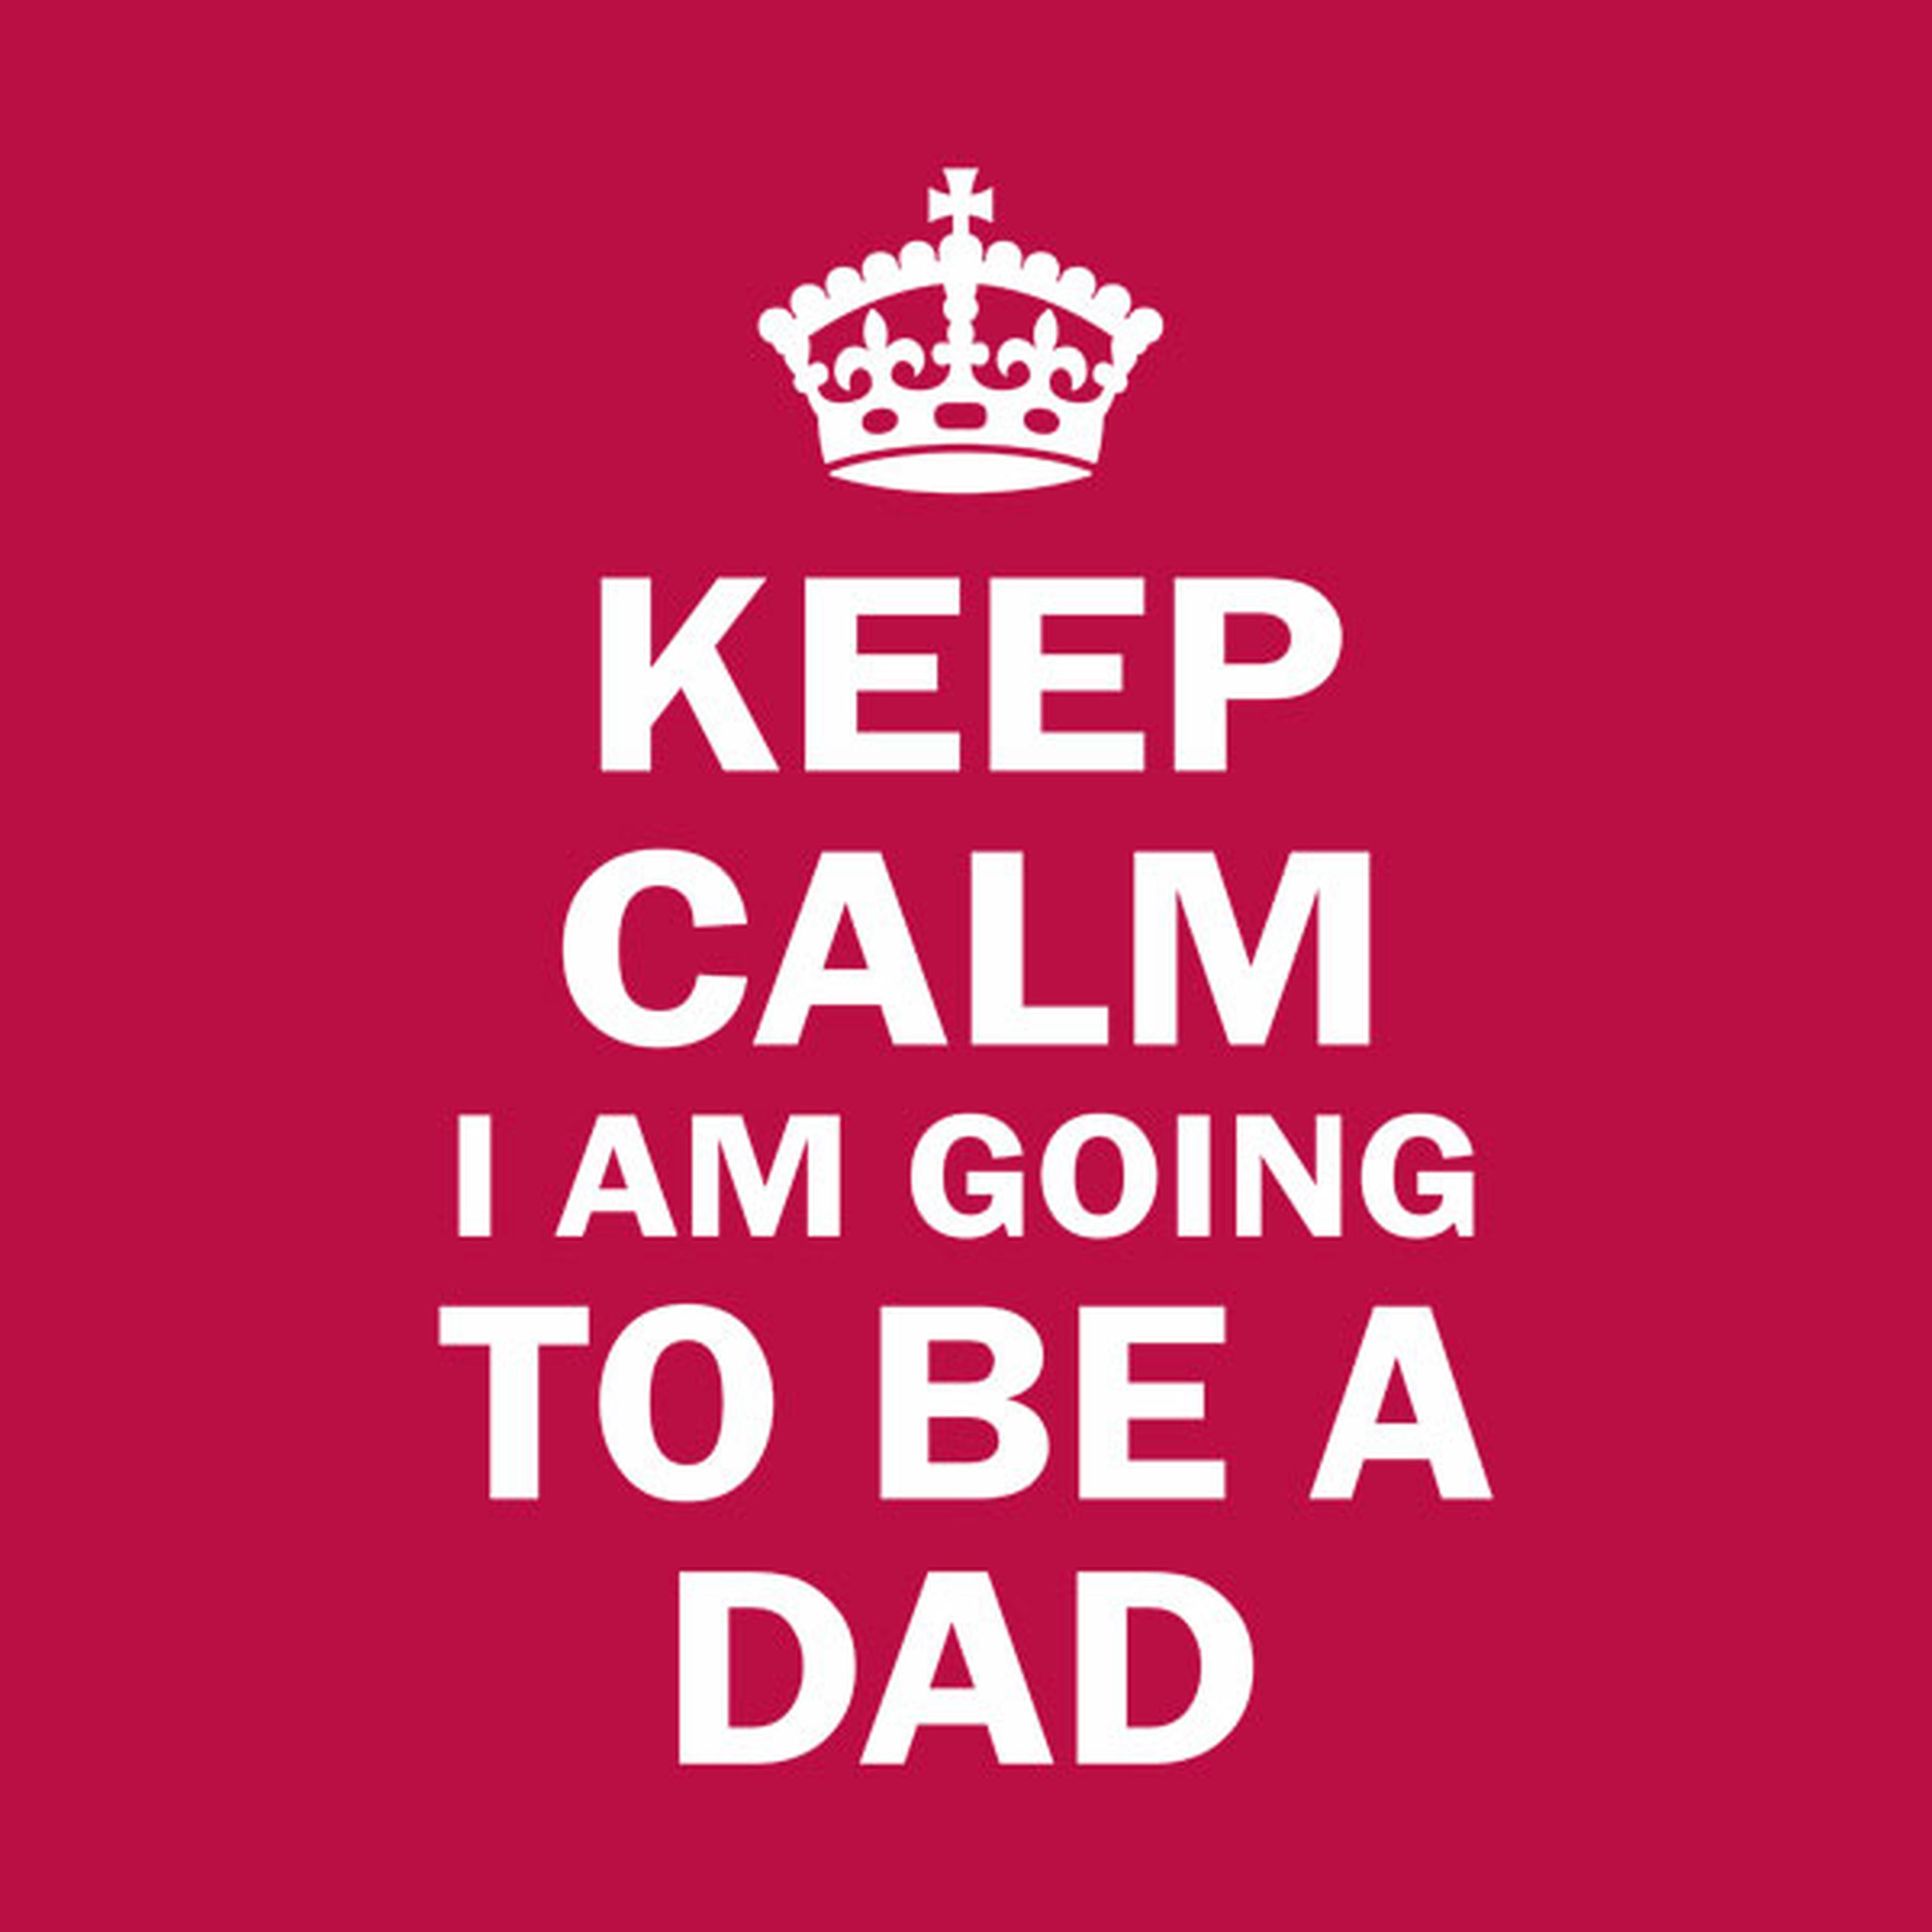 Keep calm I am going to be a dad